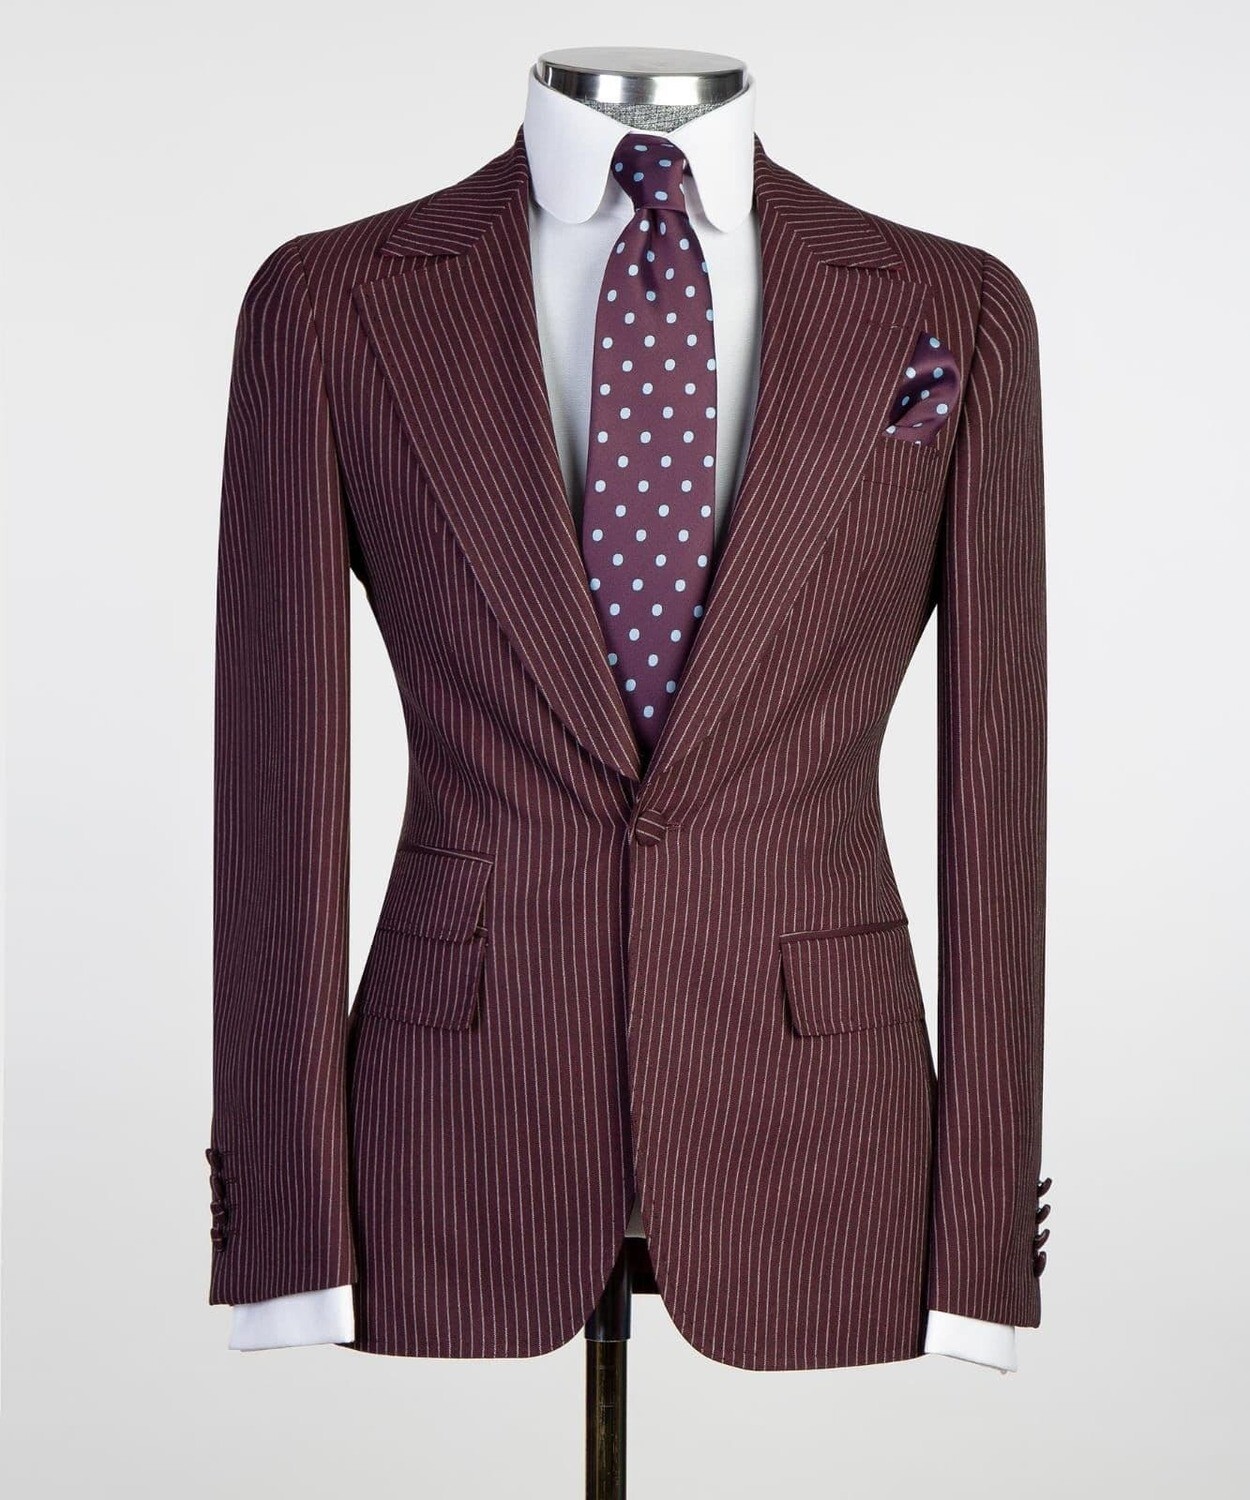 Maron Stripped Suit